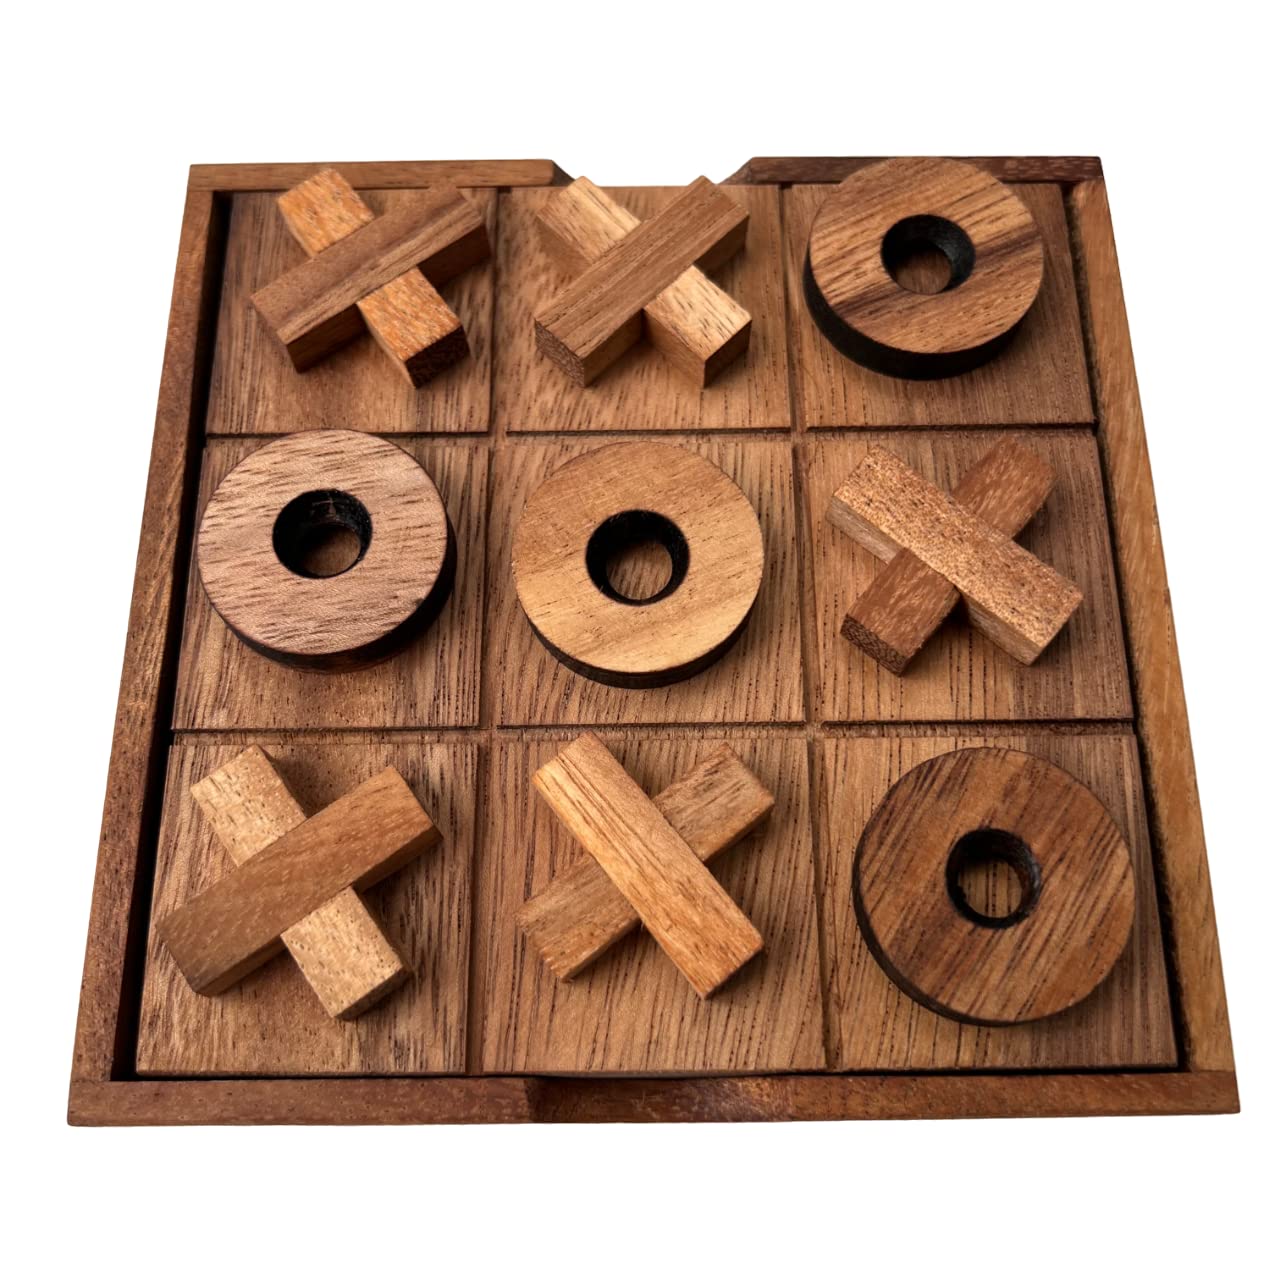 NUTTA - TicTacToe Tic Tac Toe Wooden Board XO OX Games Coffee Table Desk Toy Fun Game with Friends and Family Adult Games Travel Backyard Indoor